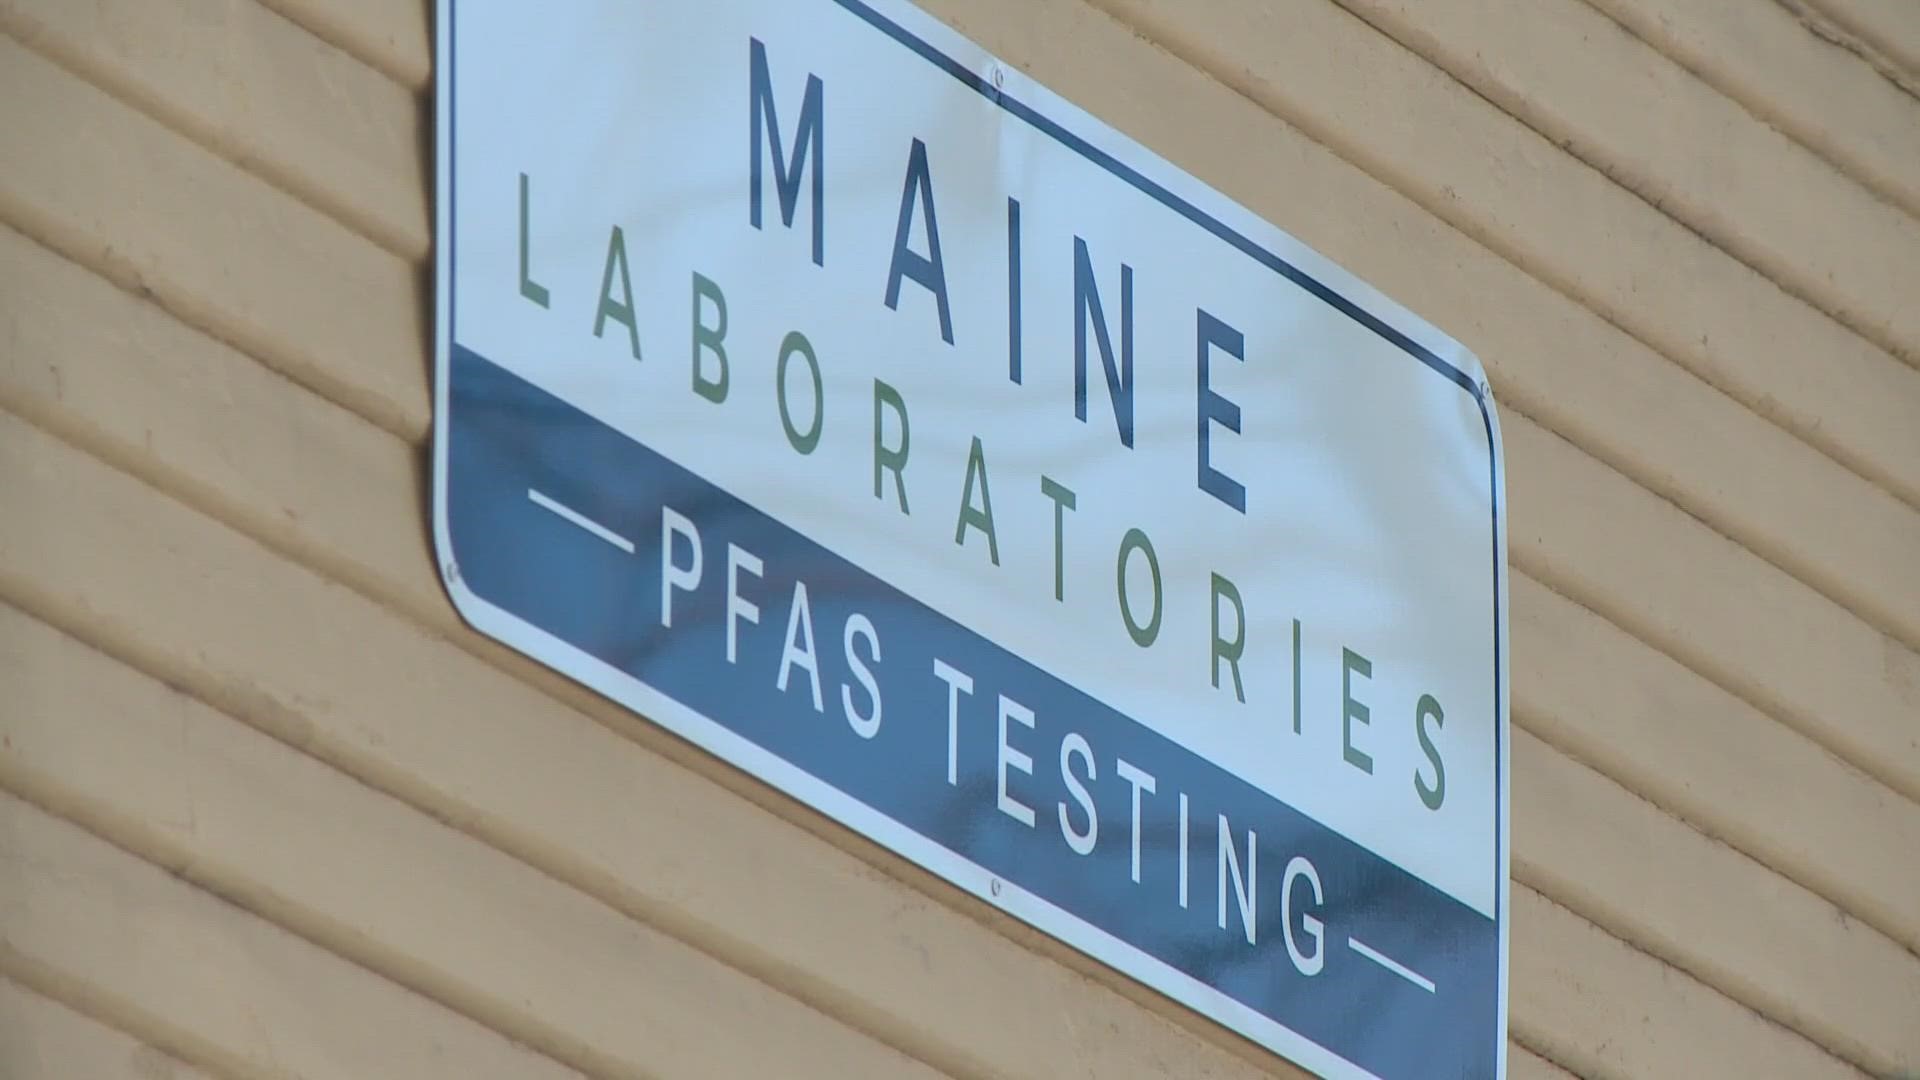 The lab located in Norridgewock plans to have results available in two weeks.